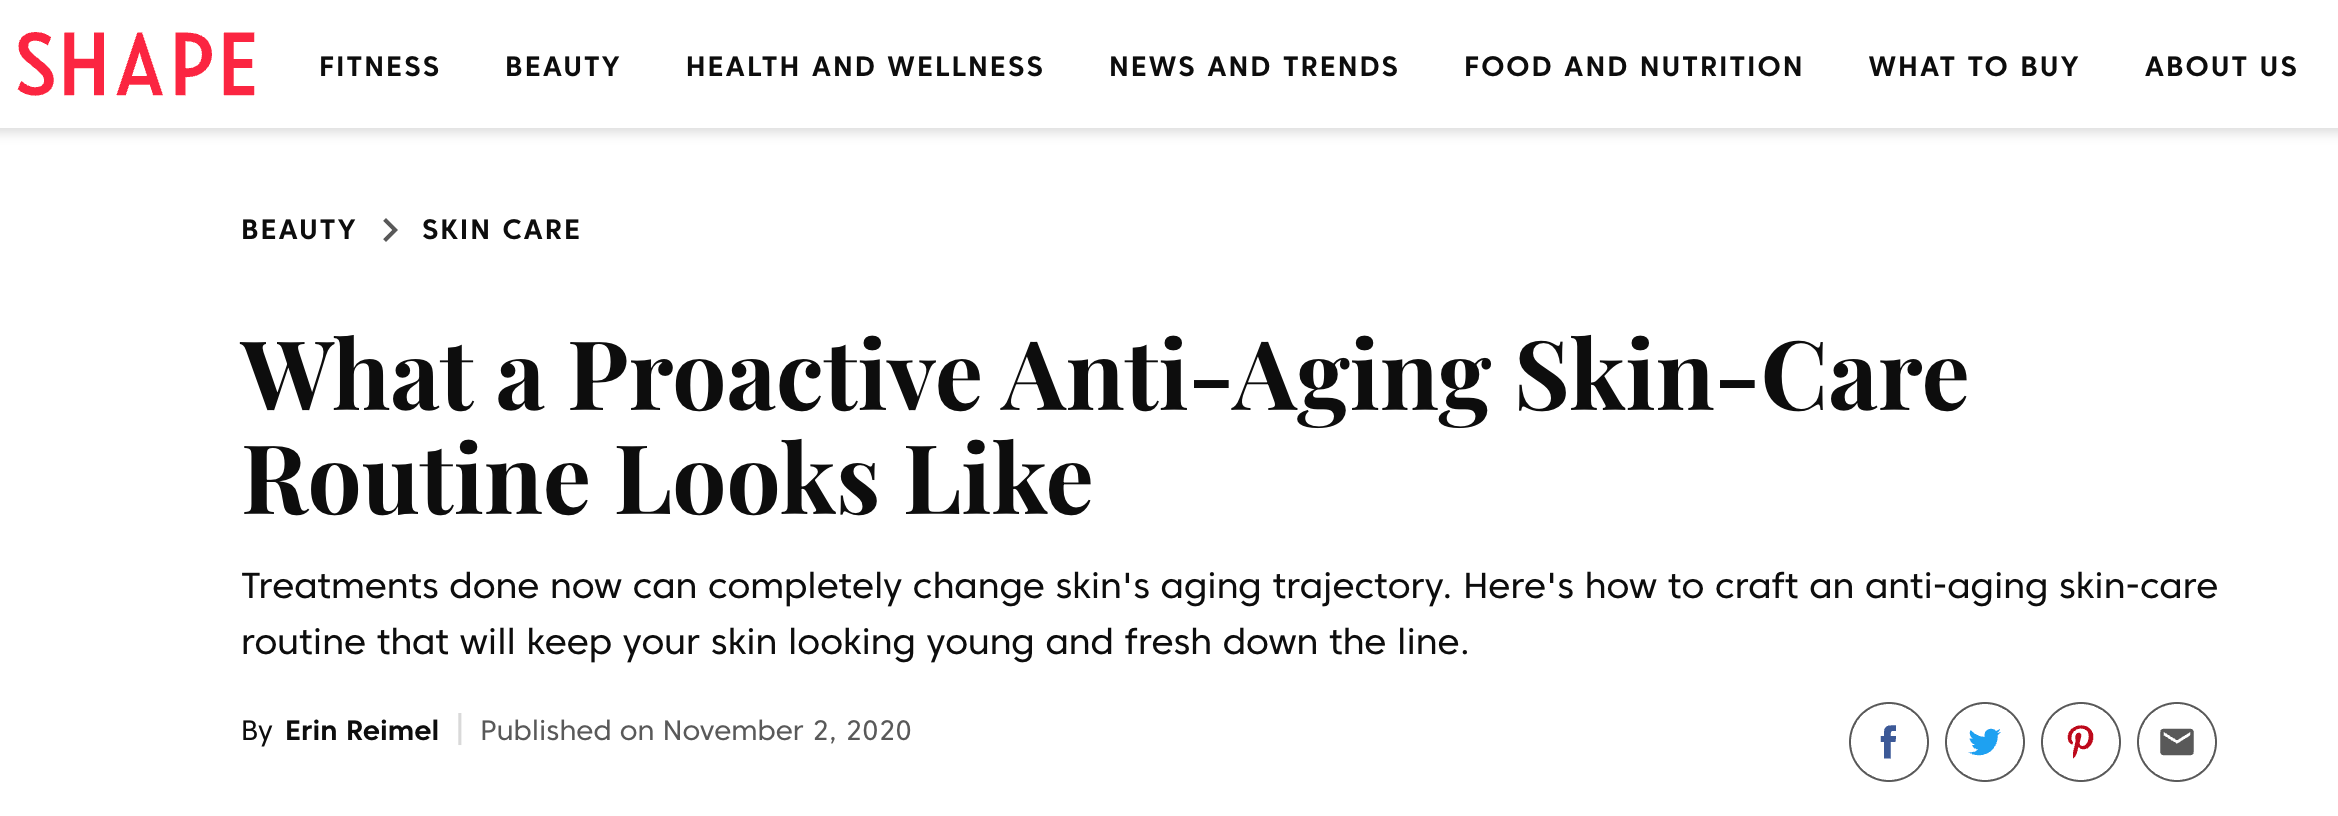 InMode In The Press: Looking for Proactive Anti-Ageing Strategies? Try Morpheus8